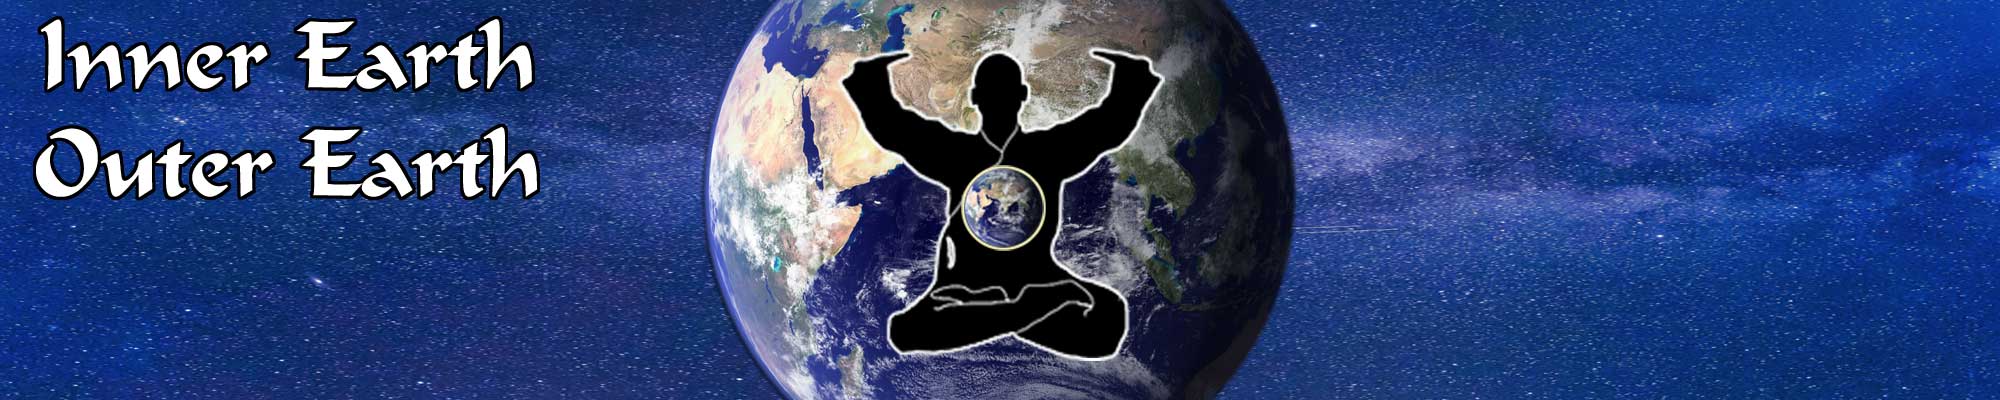 Inner Earth Outer Earth QI GONG meditation series